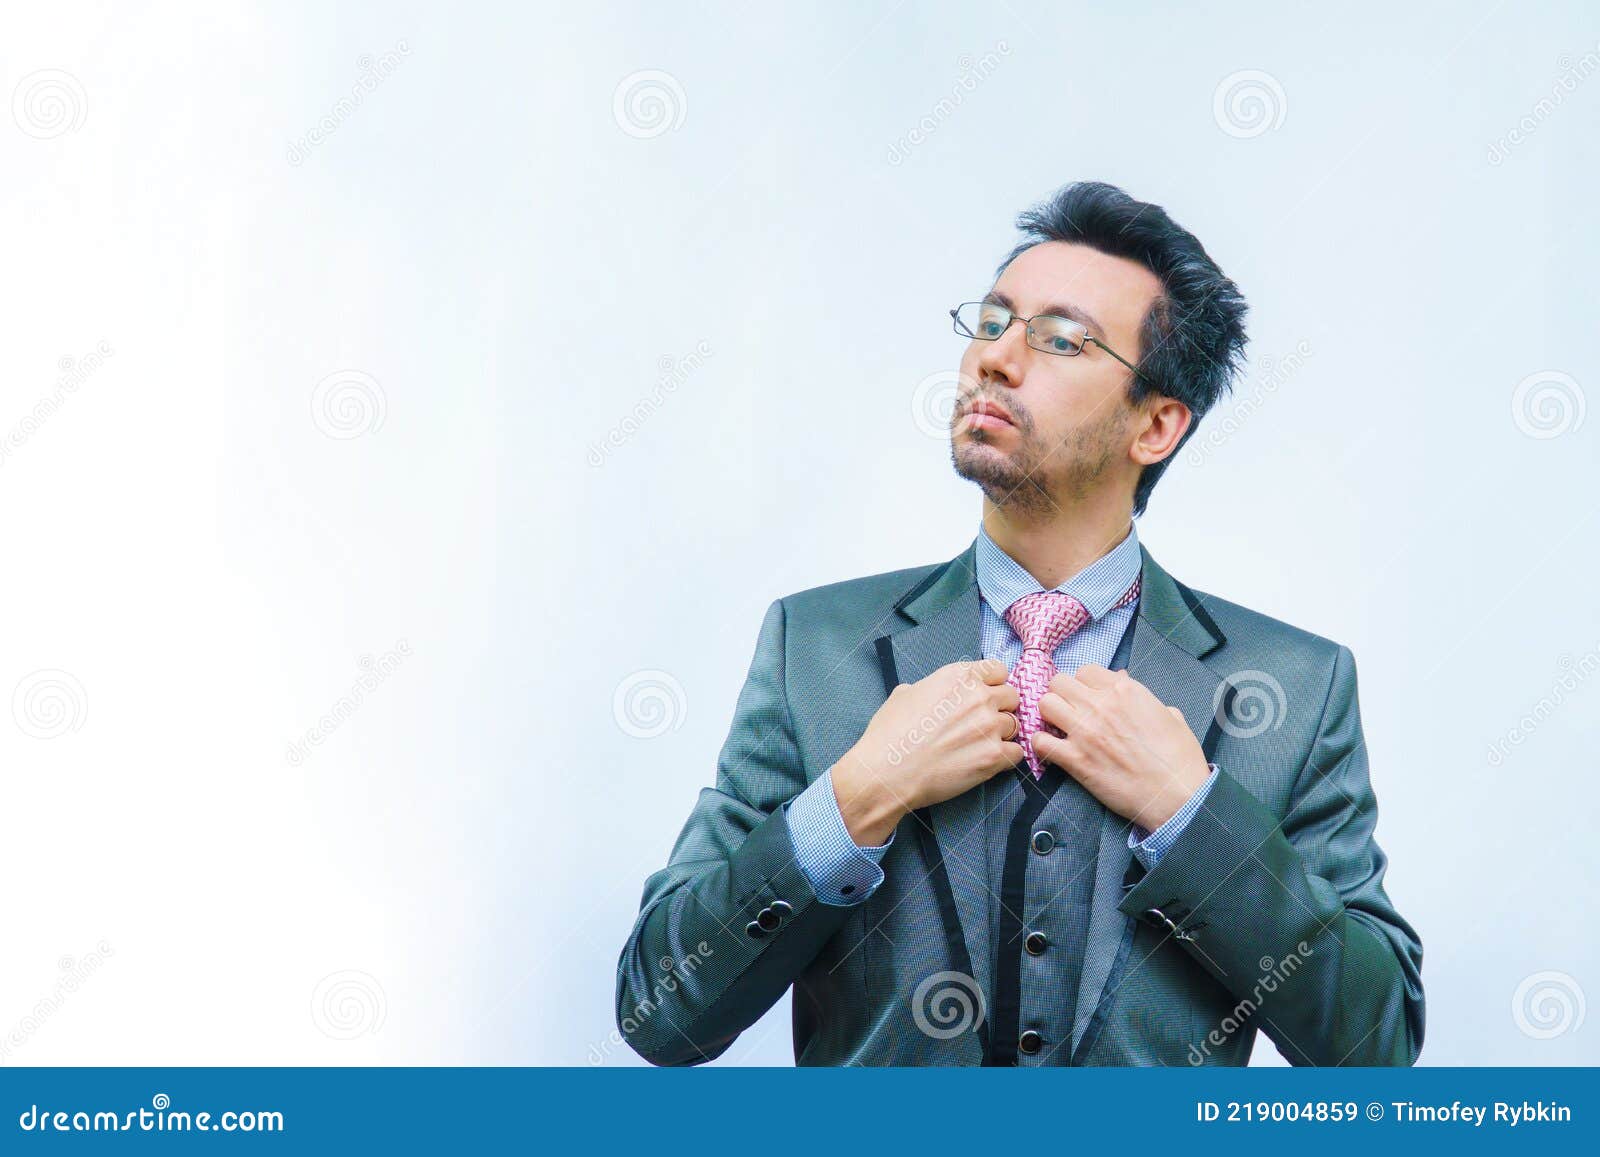 Disheveled Man In Business Suit With Folded Hands Stock Photography ...